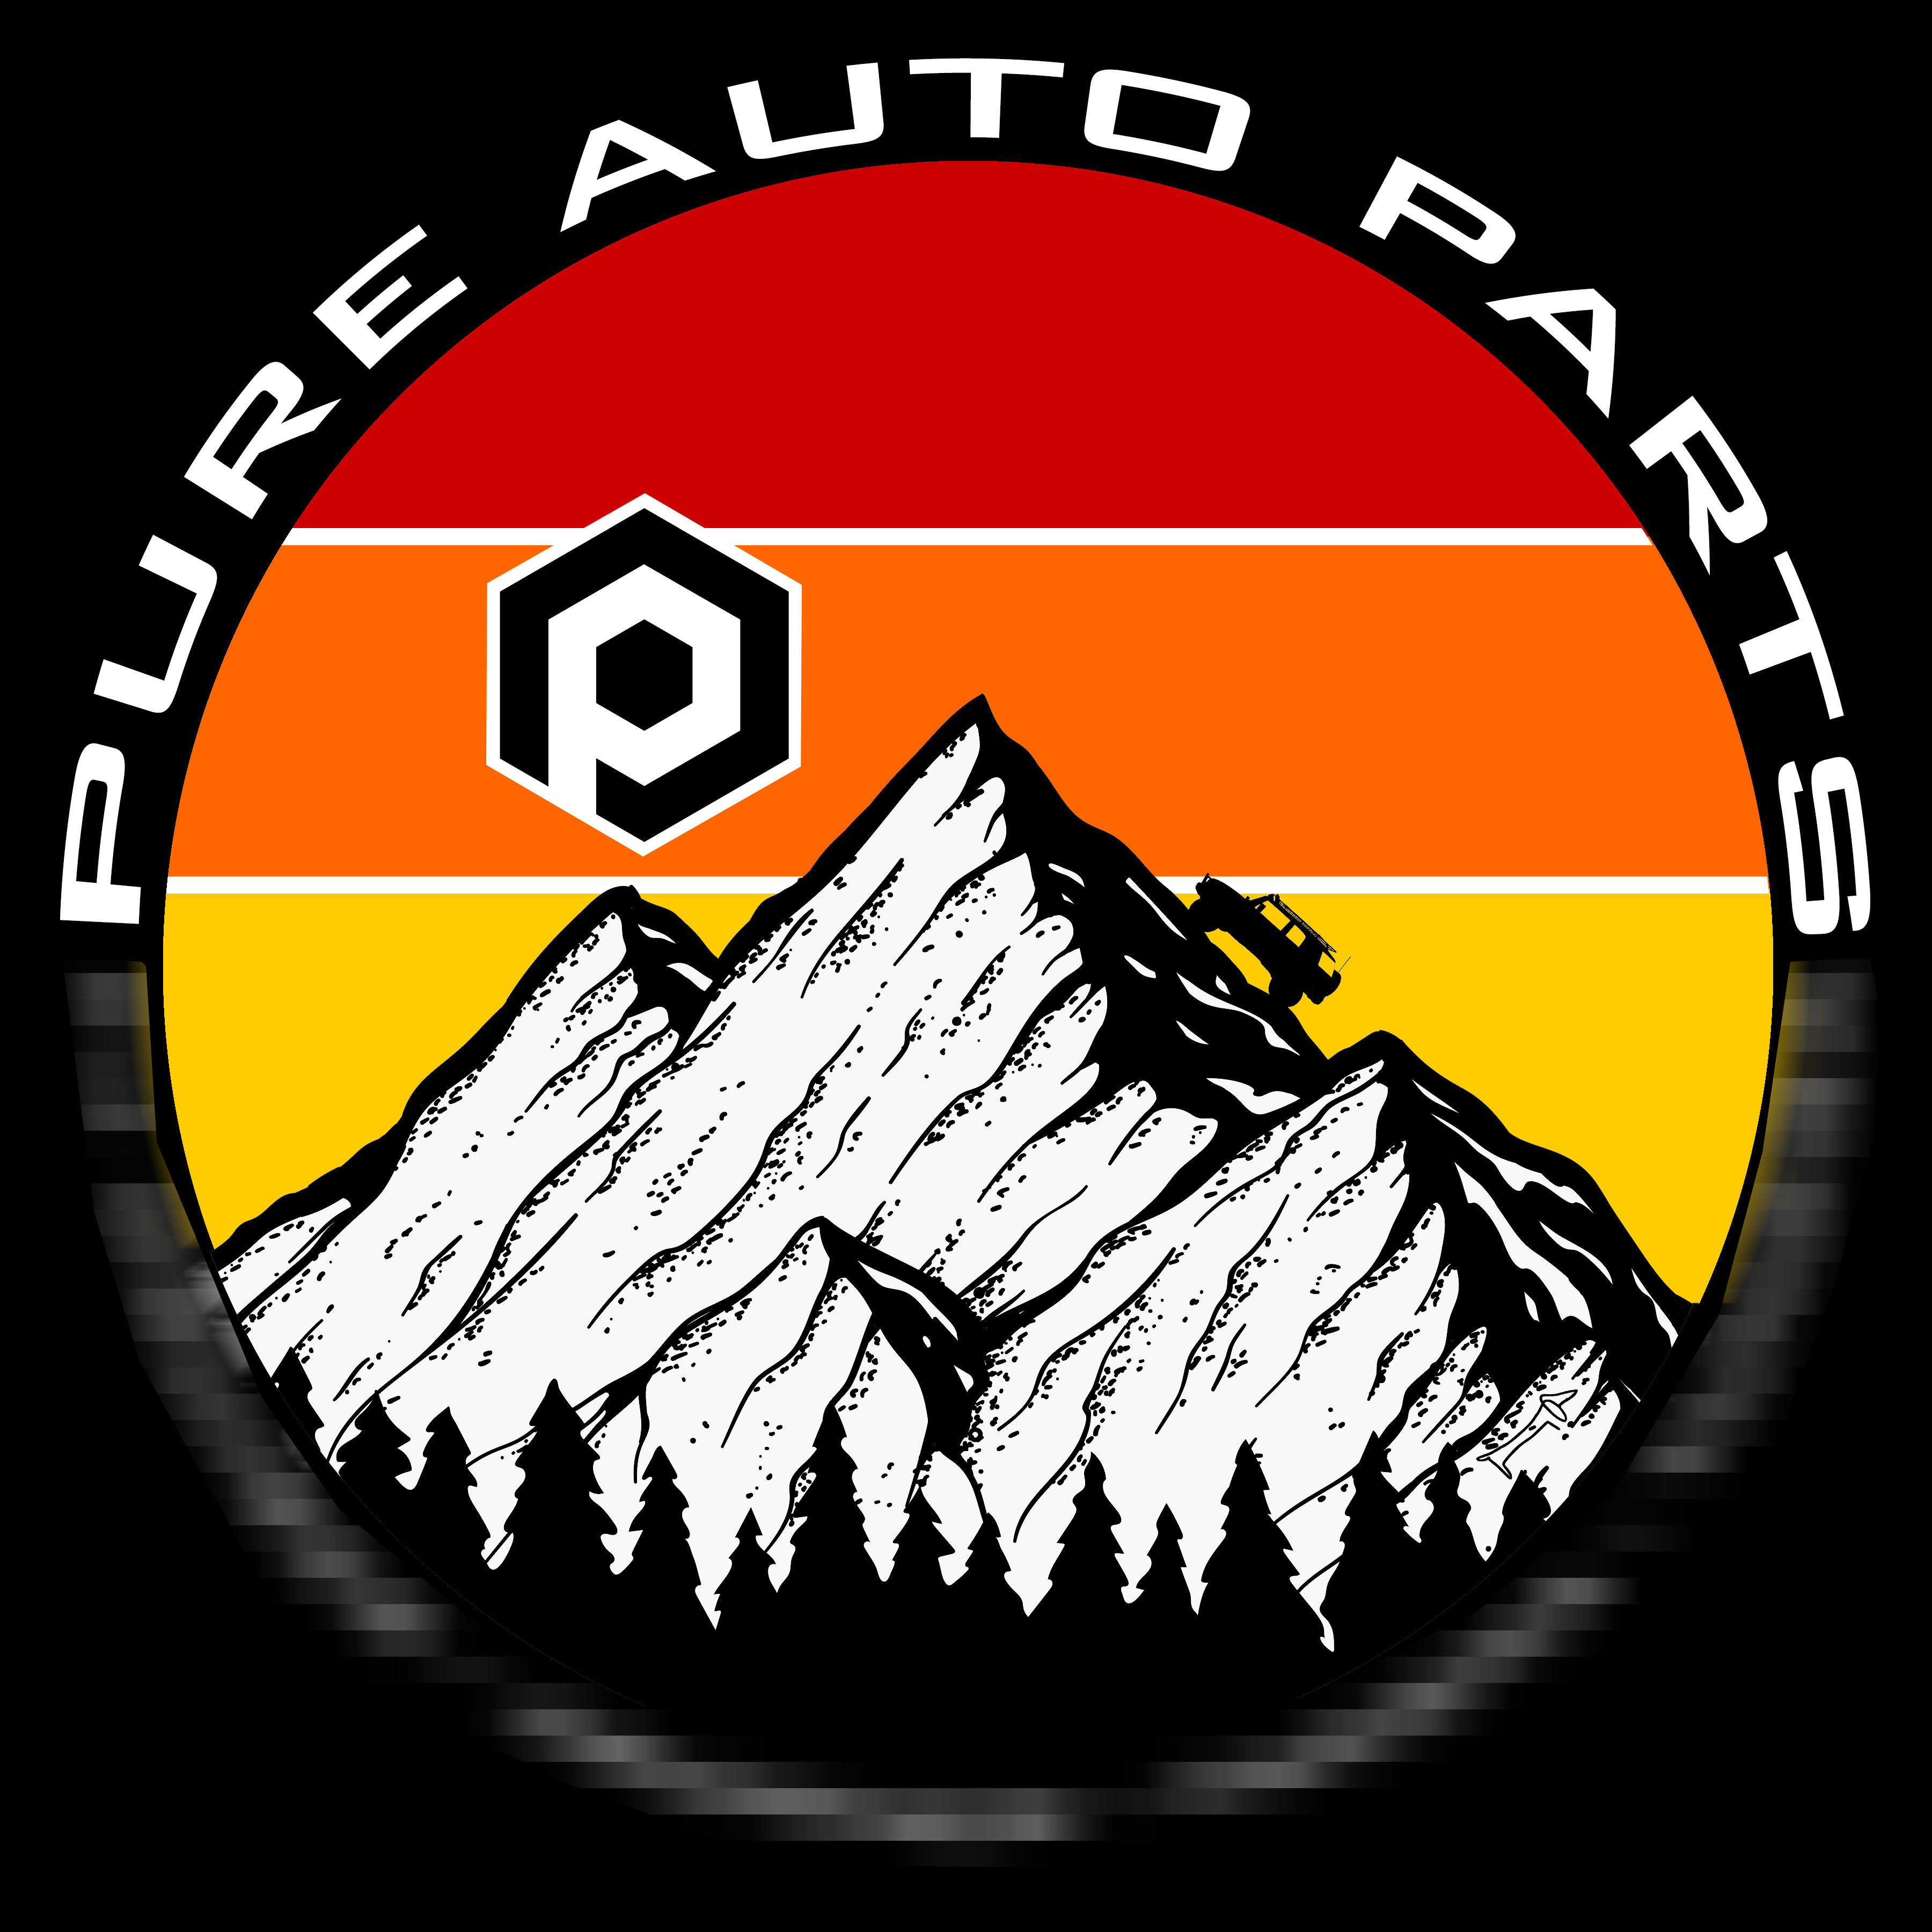 Pure Auto Parts - OverLanding T-Shirt - BLACK - FREE SHIPPING